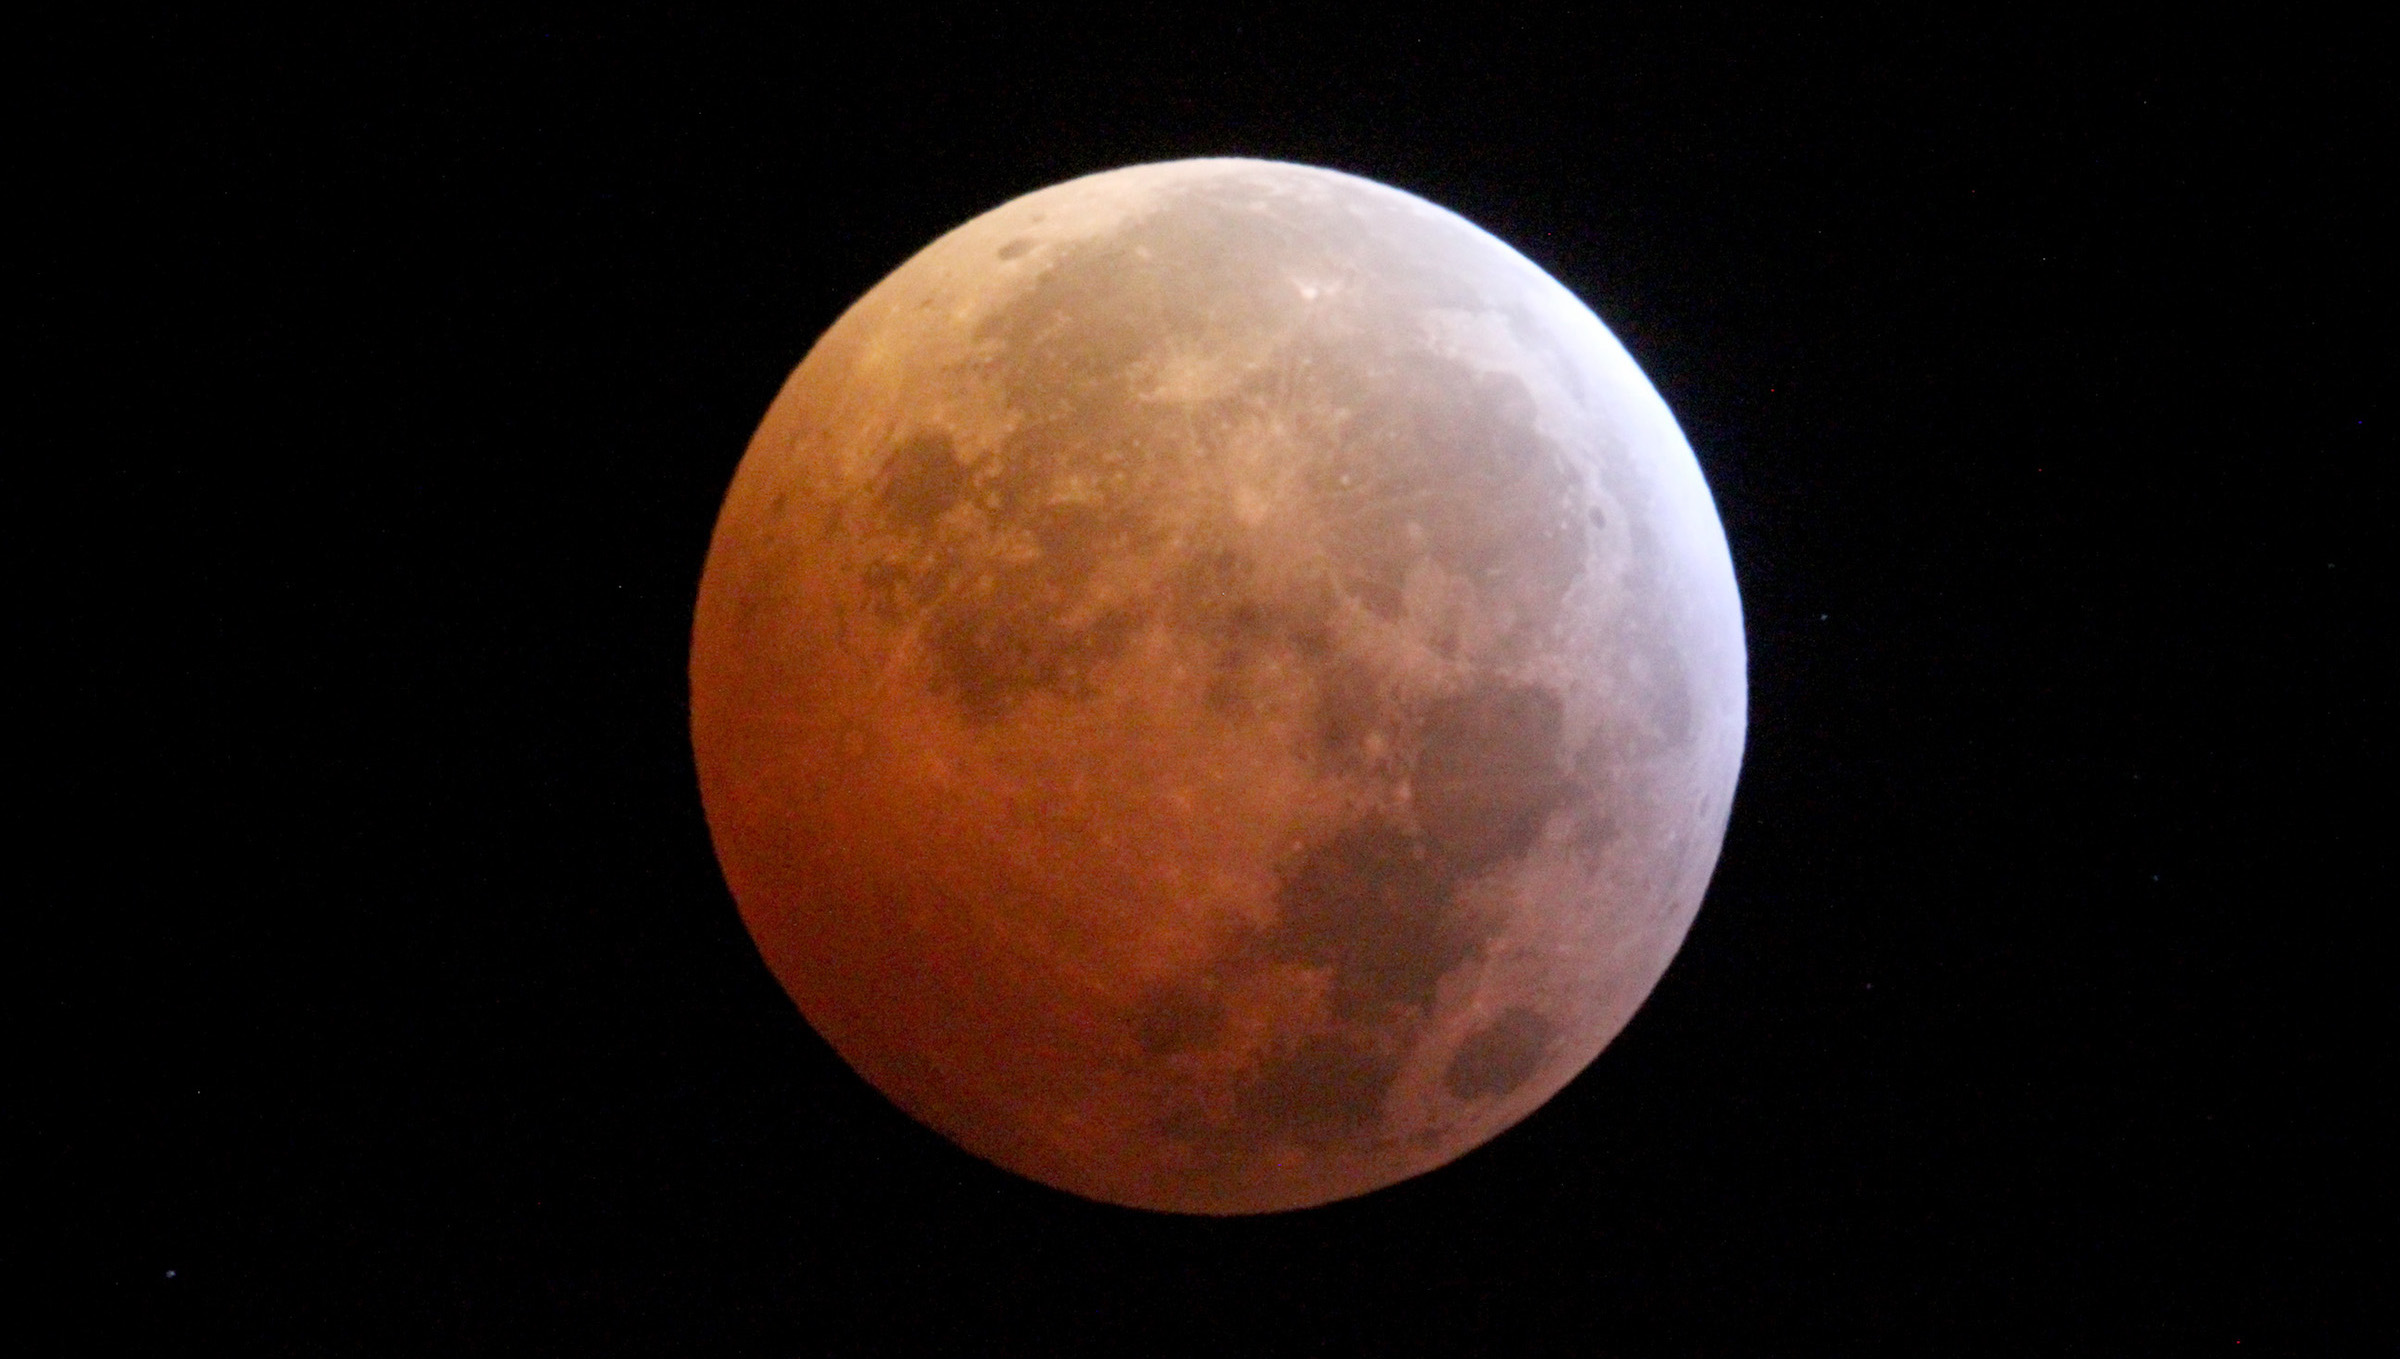 The moon looks red during the total lunar eclipse